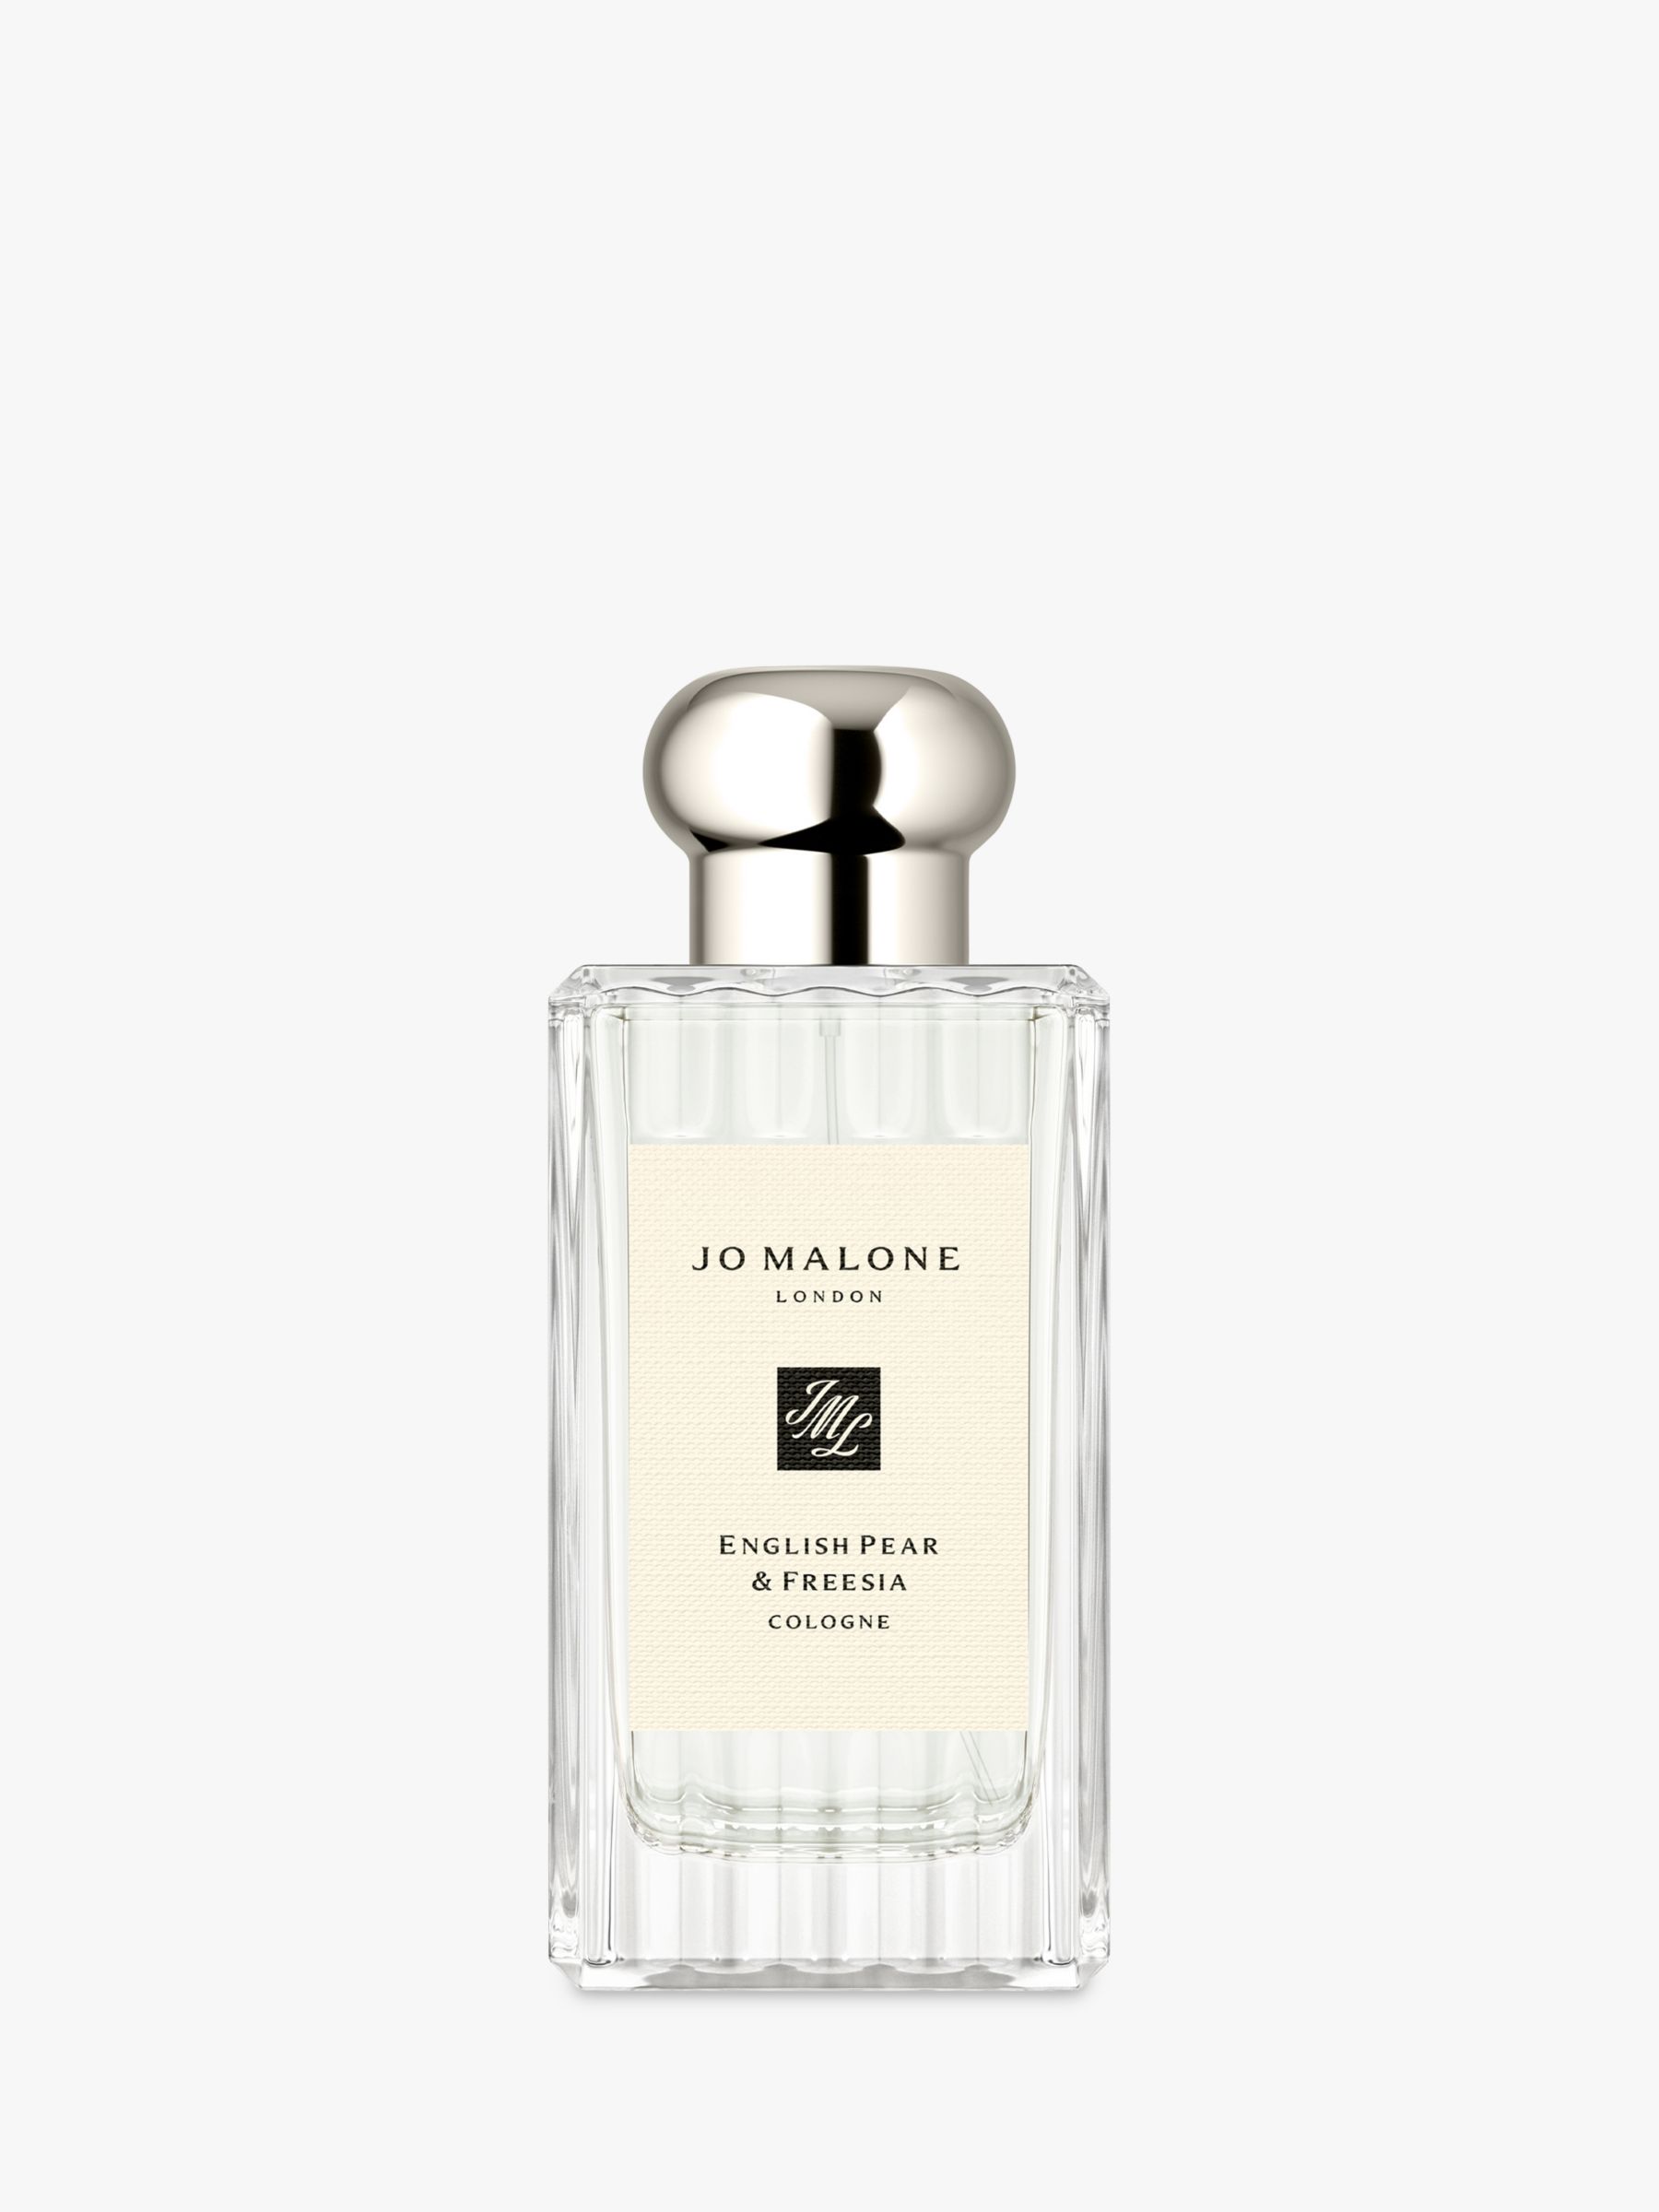 Jo Malone London English Pear & Freesia Cologne Fluted Special Edition, 100ml